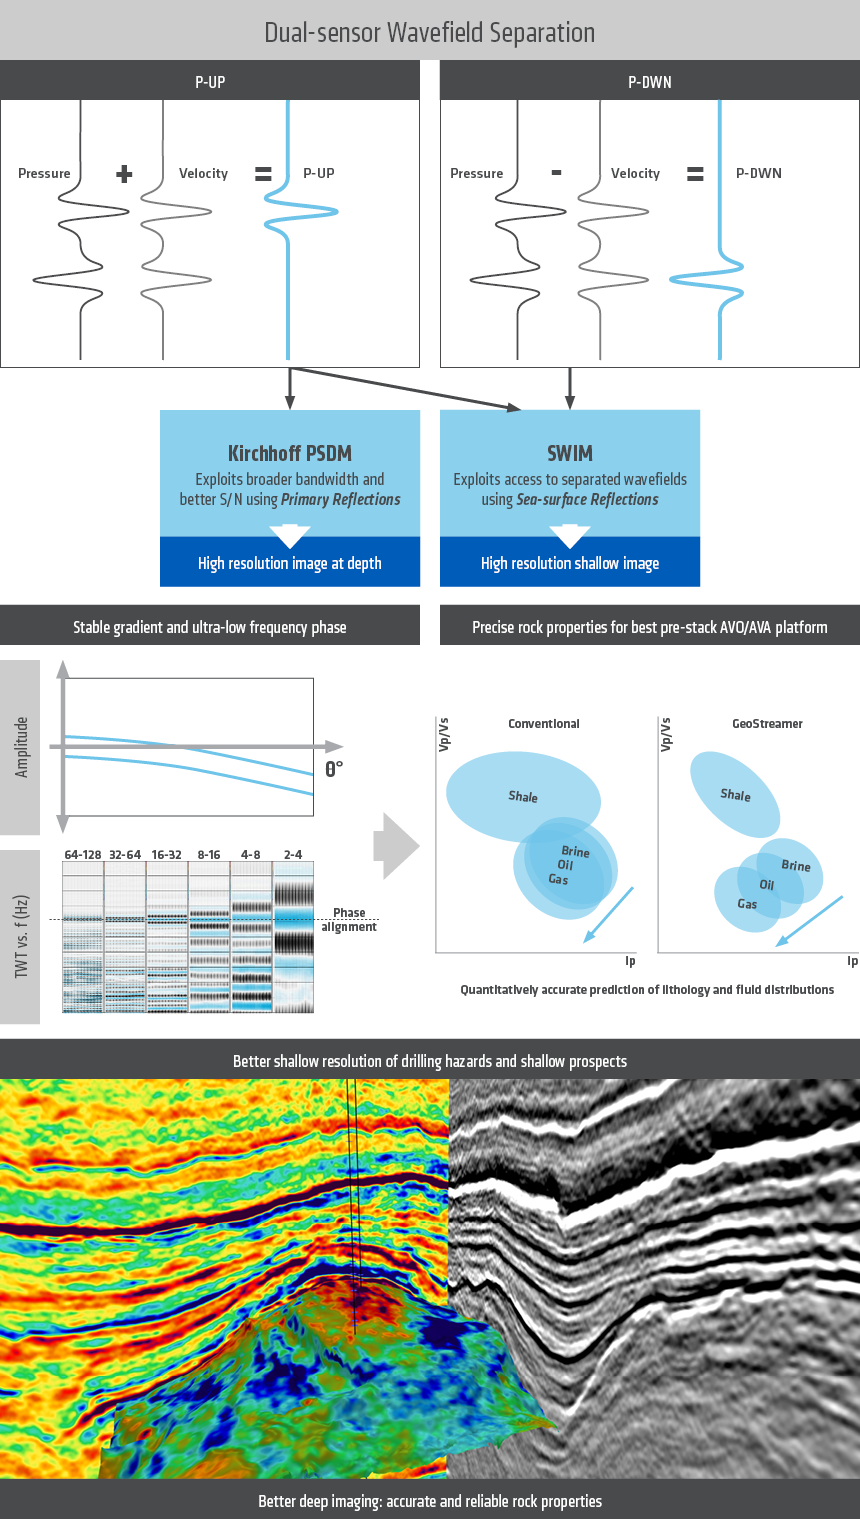 For the Caswell MC3D data, GeoStreamer P-UP shot gathers are used to provide information at target depths whilst both P-UP and P-DWN wavefields (SWIM) are used for shallow interpretation and characterization. Accurate lithology/fluid prediction is ensured by preserving a stable gradient and ultra-low frequency phase. The lower image highlights the complementary nature of elastic seismic attributes and seismic amplitude images.